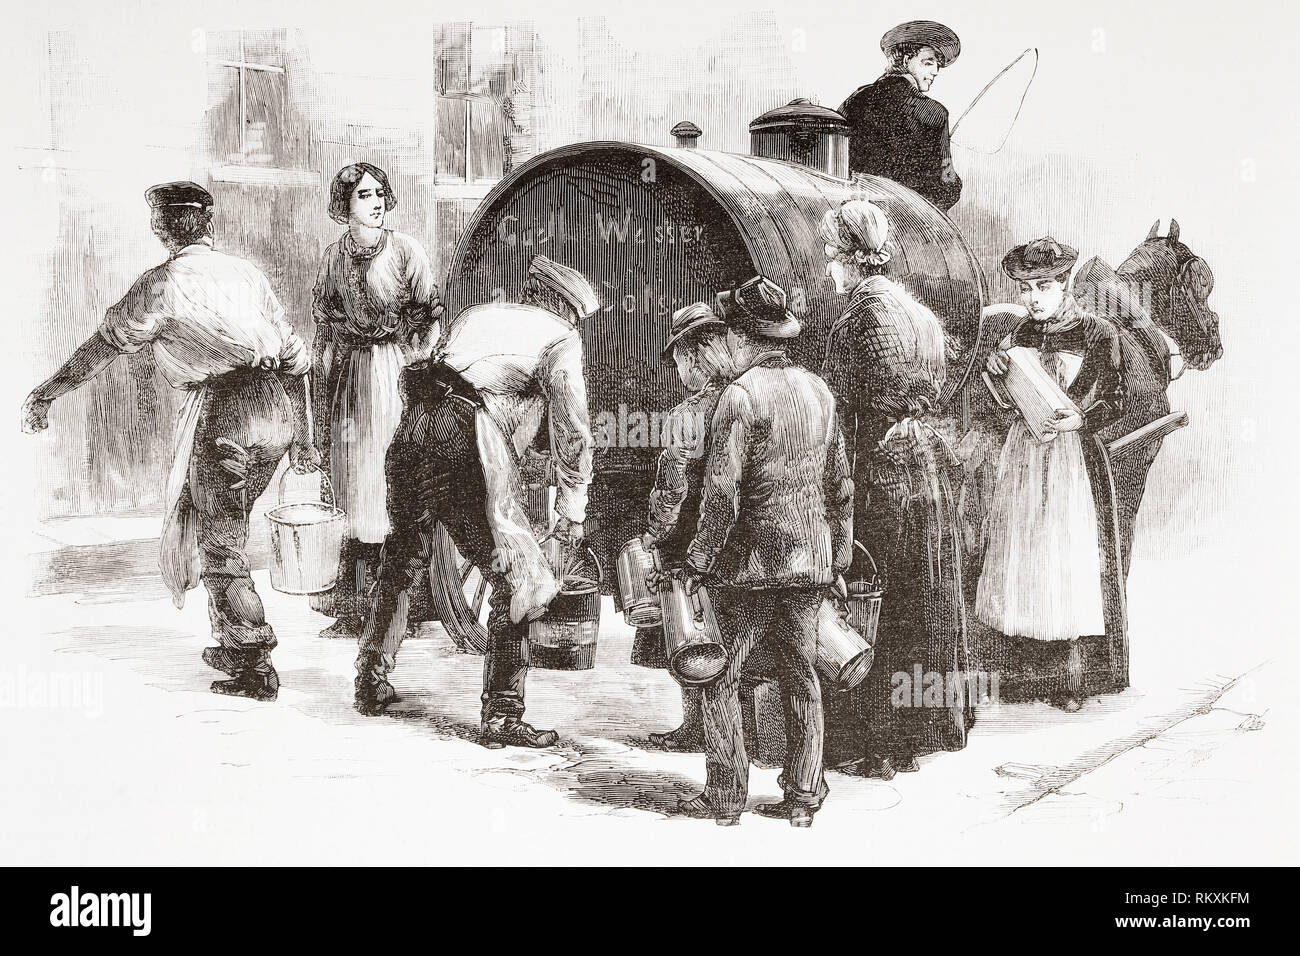 Distributing free pure water to the population during the 1892 Cholera outbreak in Hamburg, Germany.  From La Ilustracion Espanola y Americana, published 1892. Stock Photo